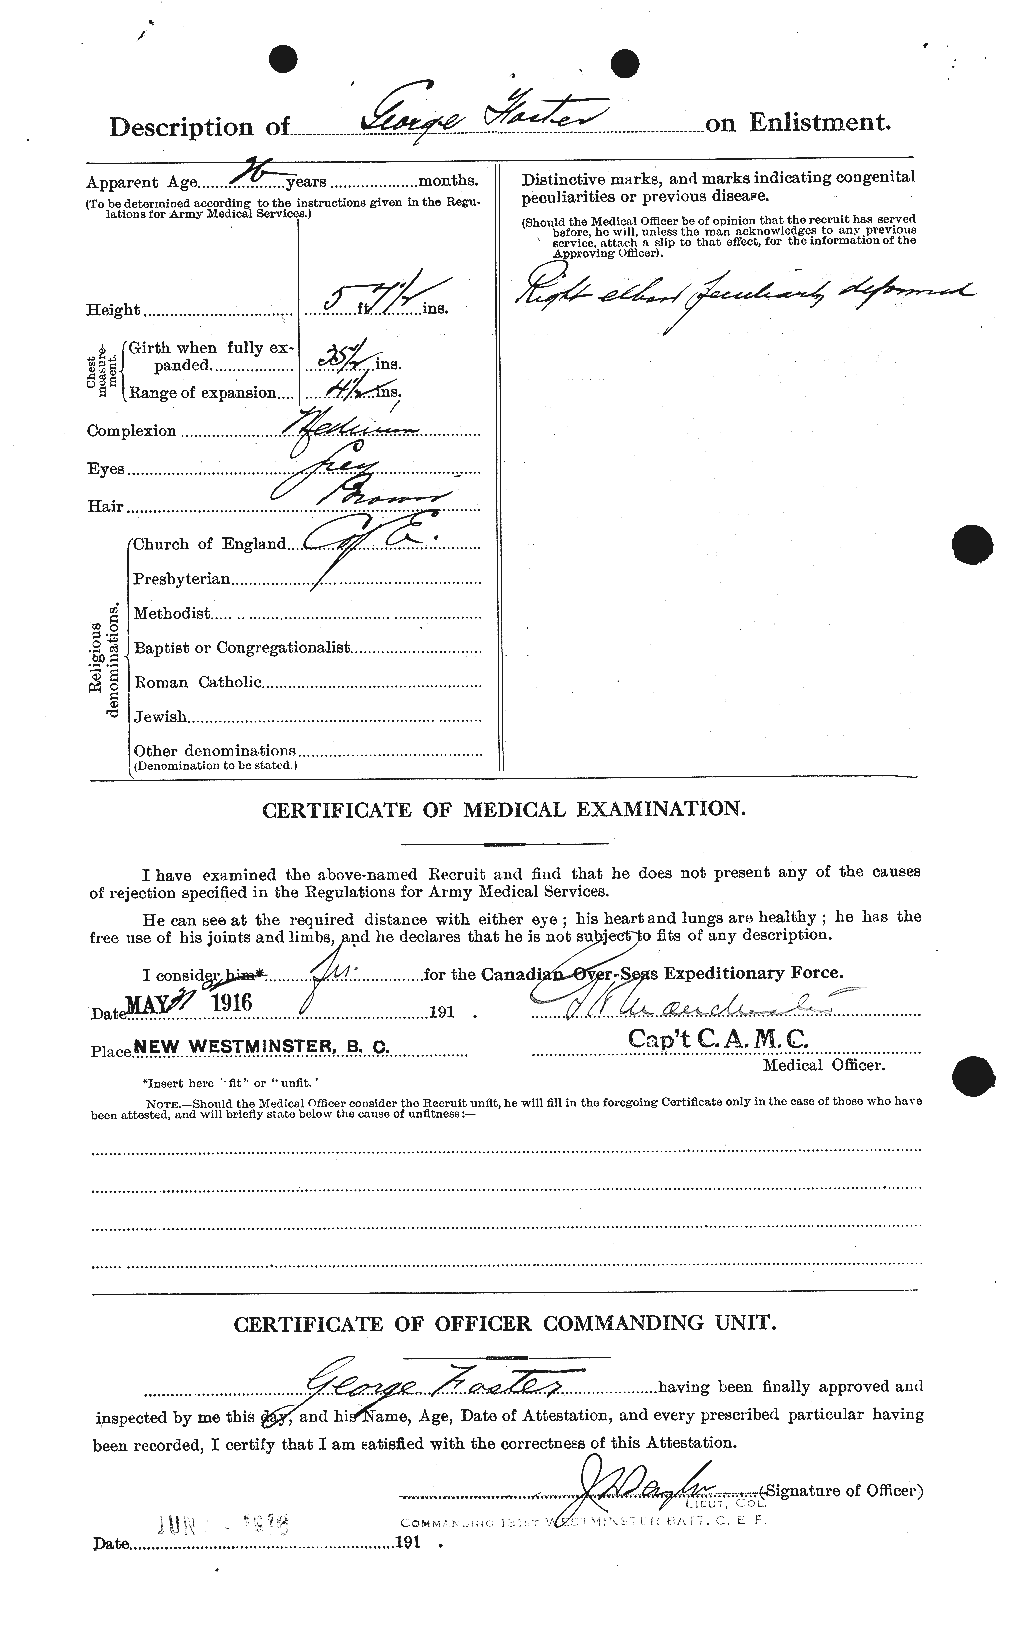 Personnel Records of the First World War - CEF 330666b